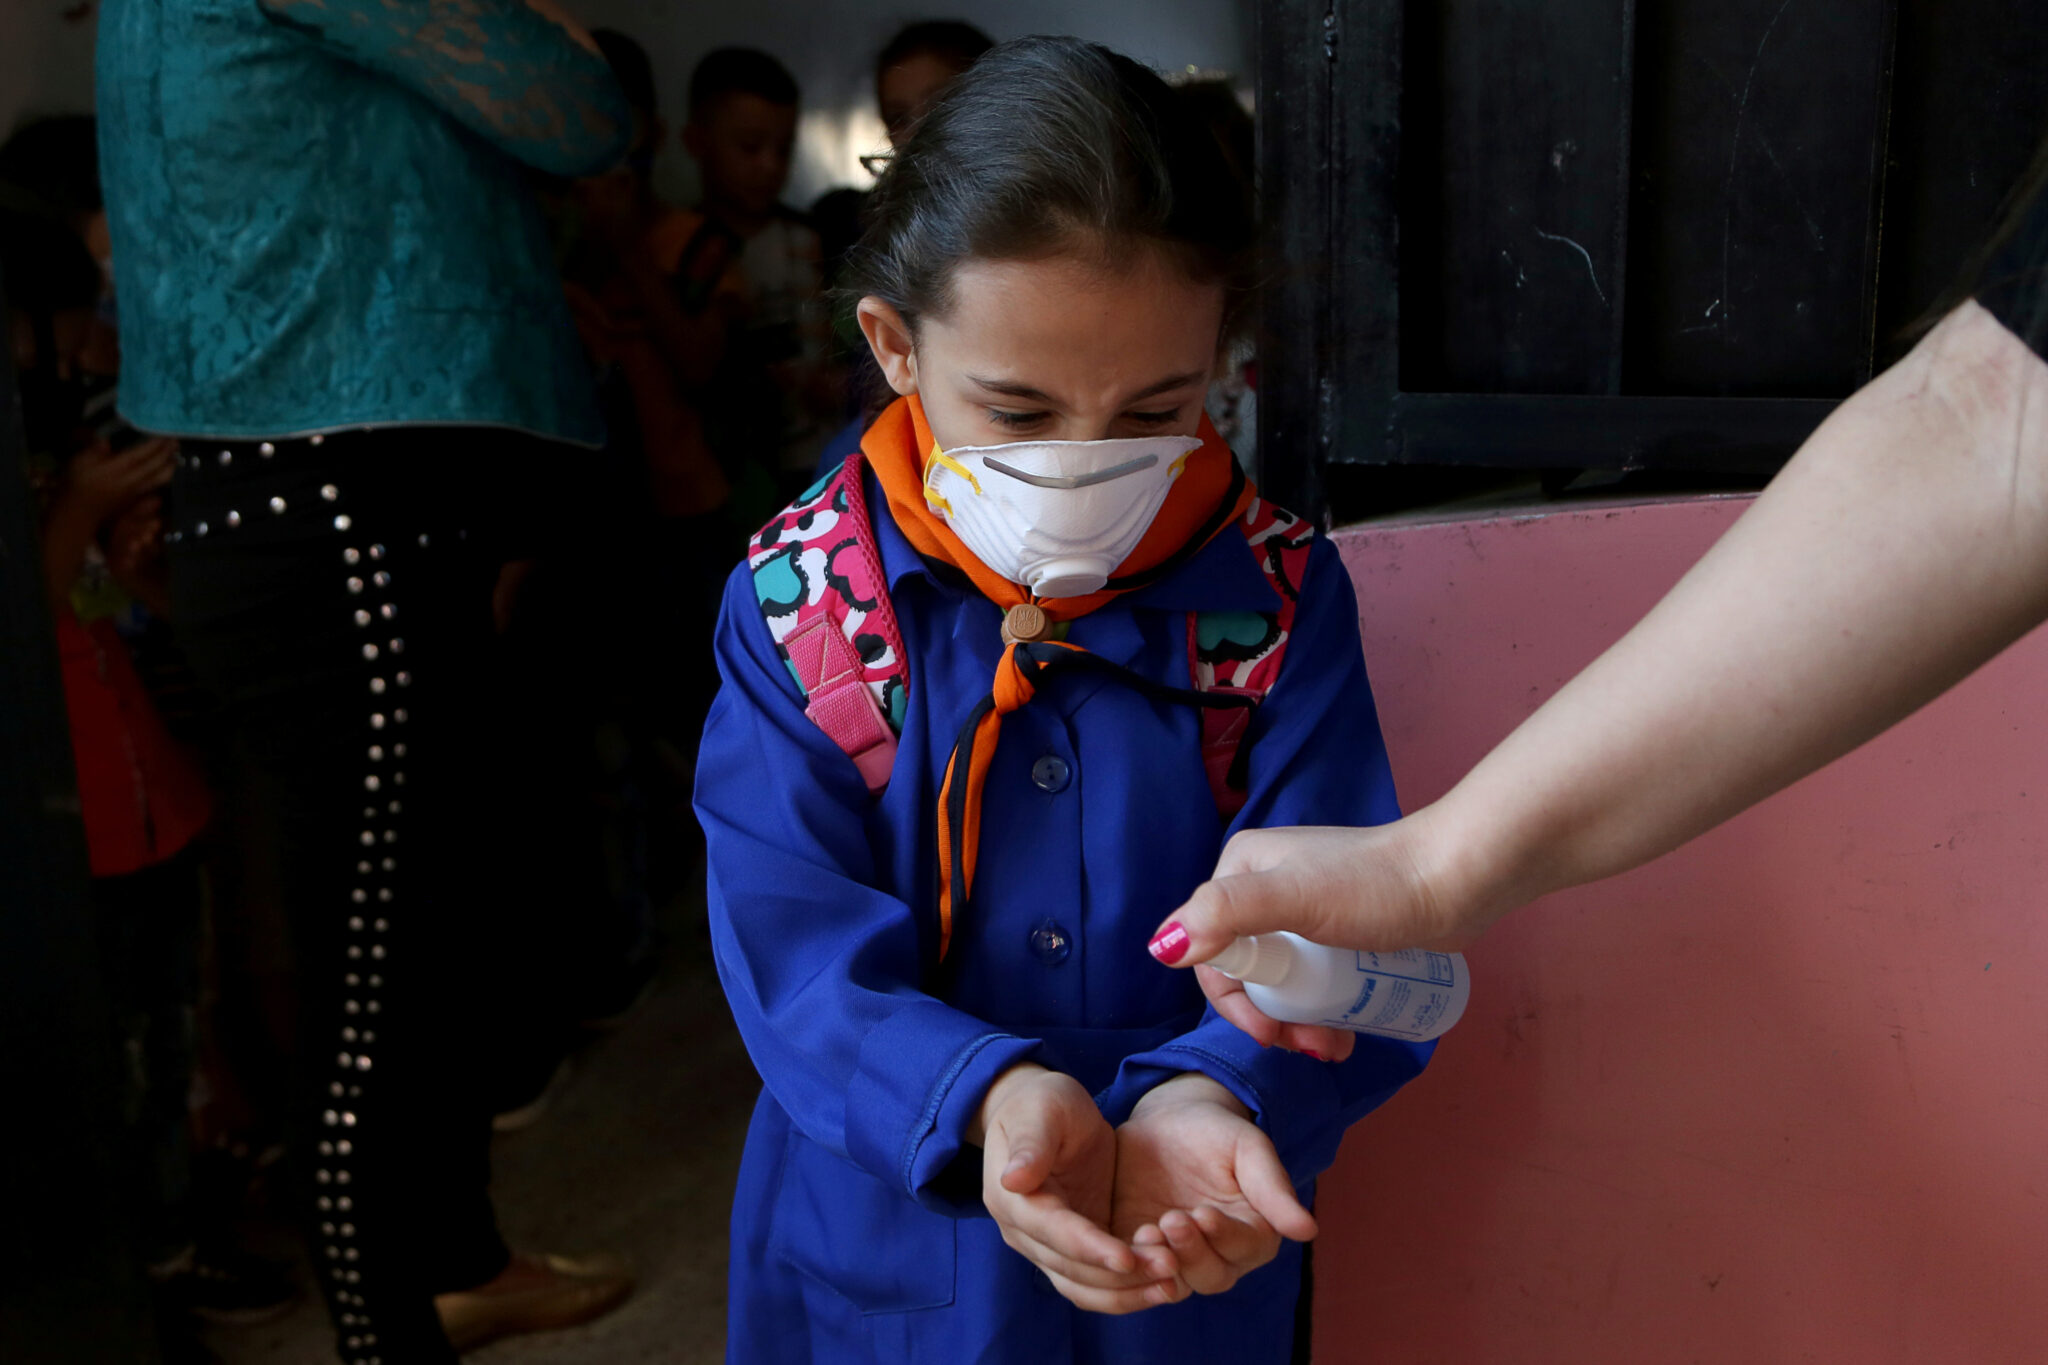 A Syrian student sanitizing her hands for protection against the coronavirus (COVID-19) pandemic (Reuters)